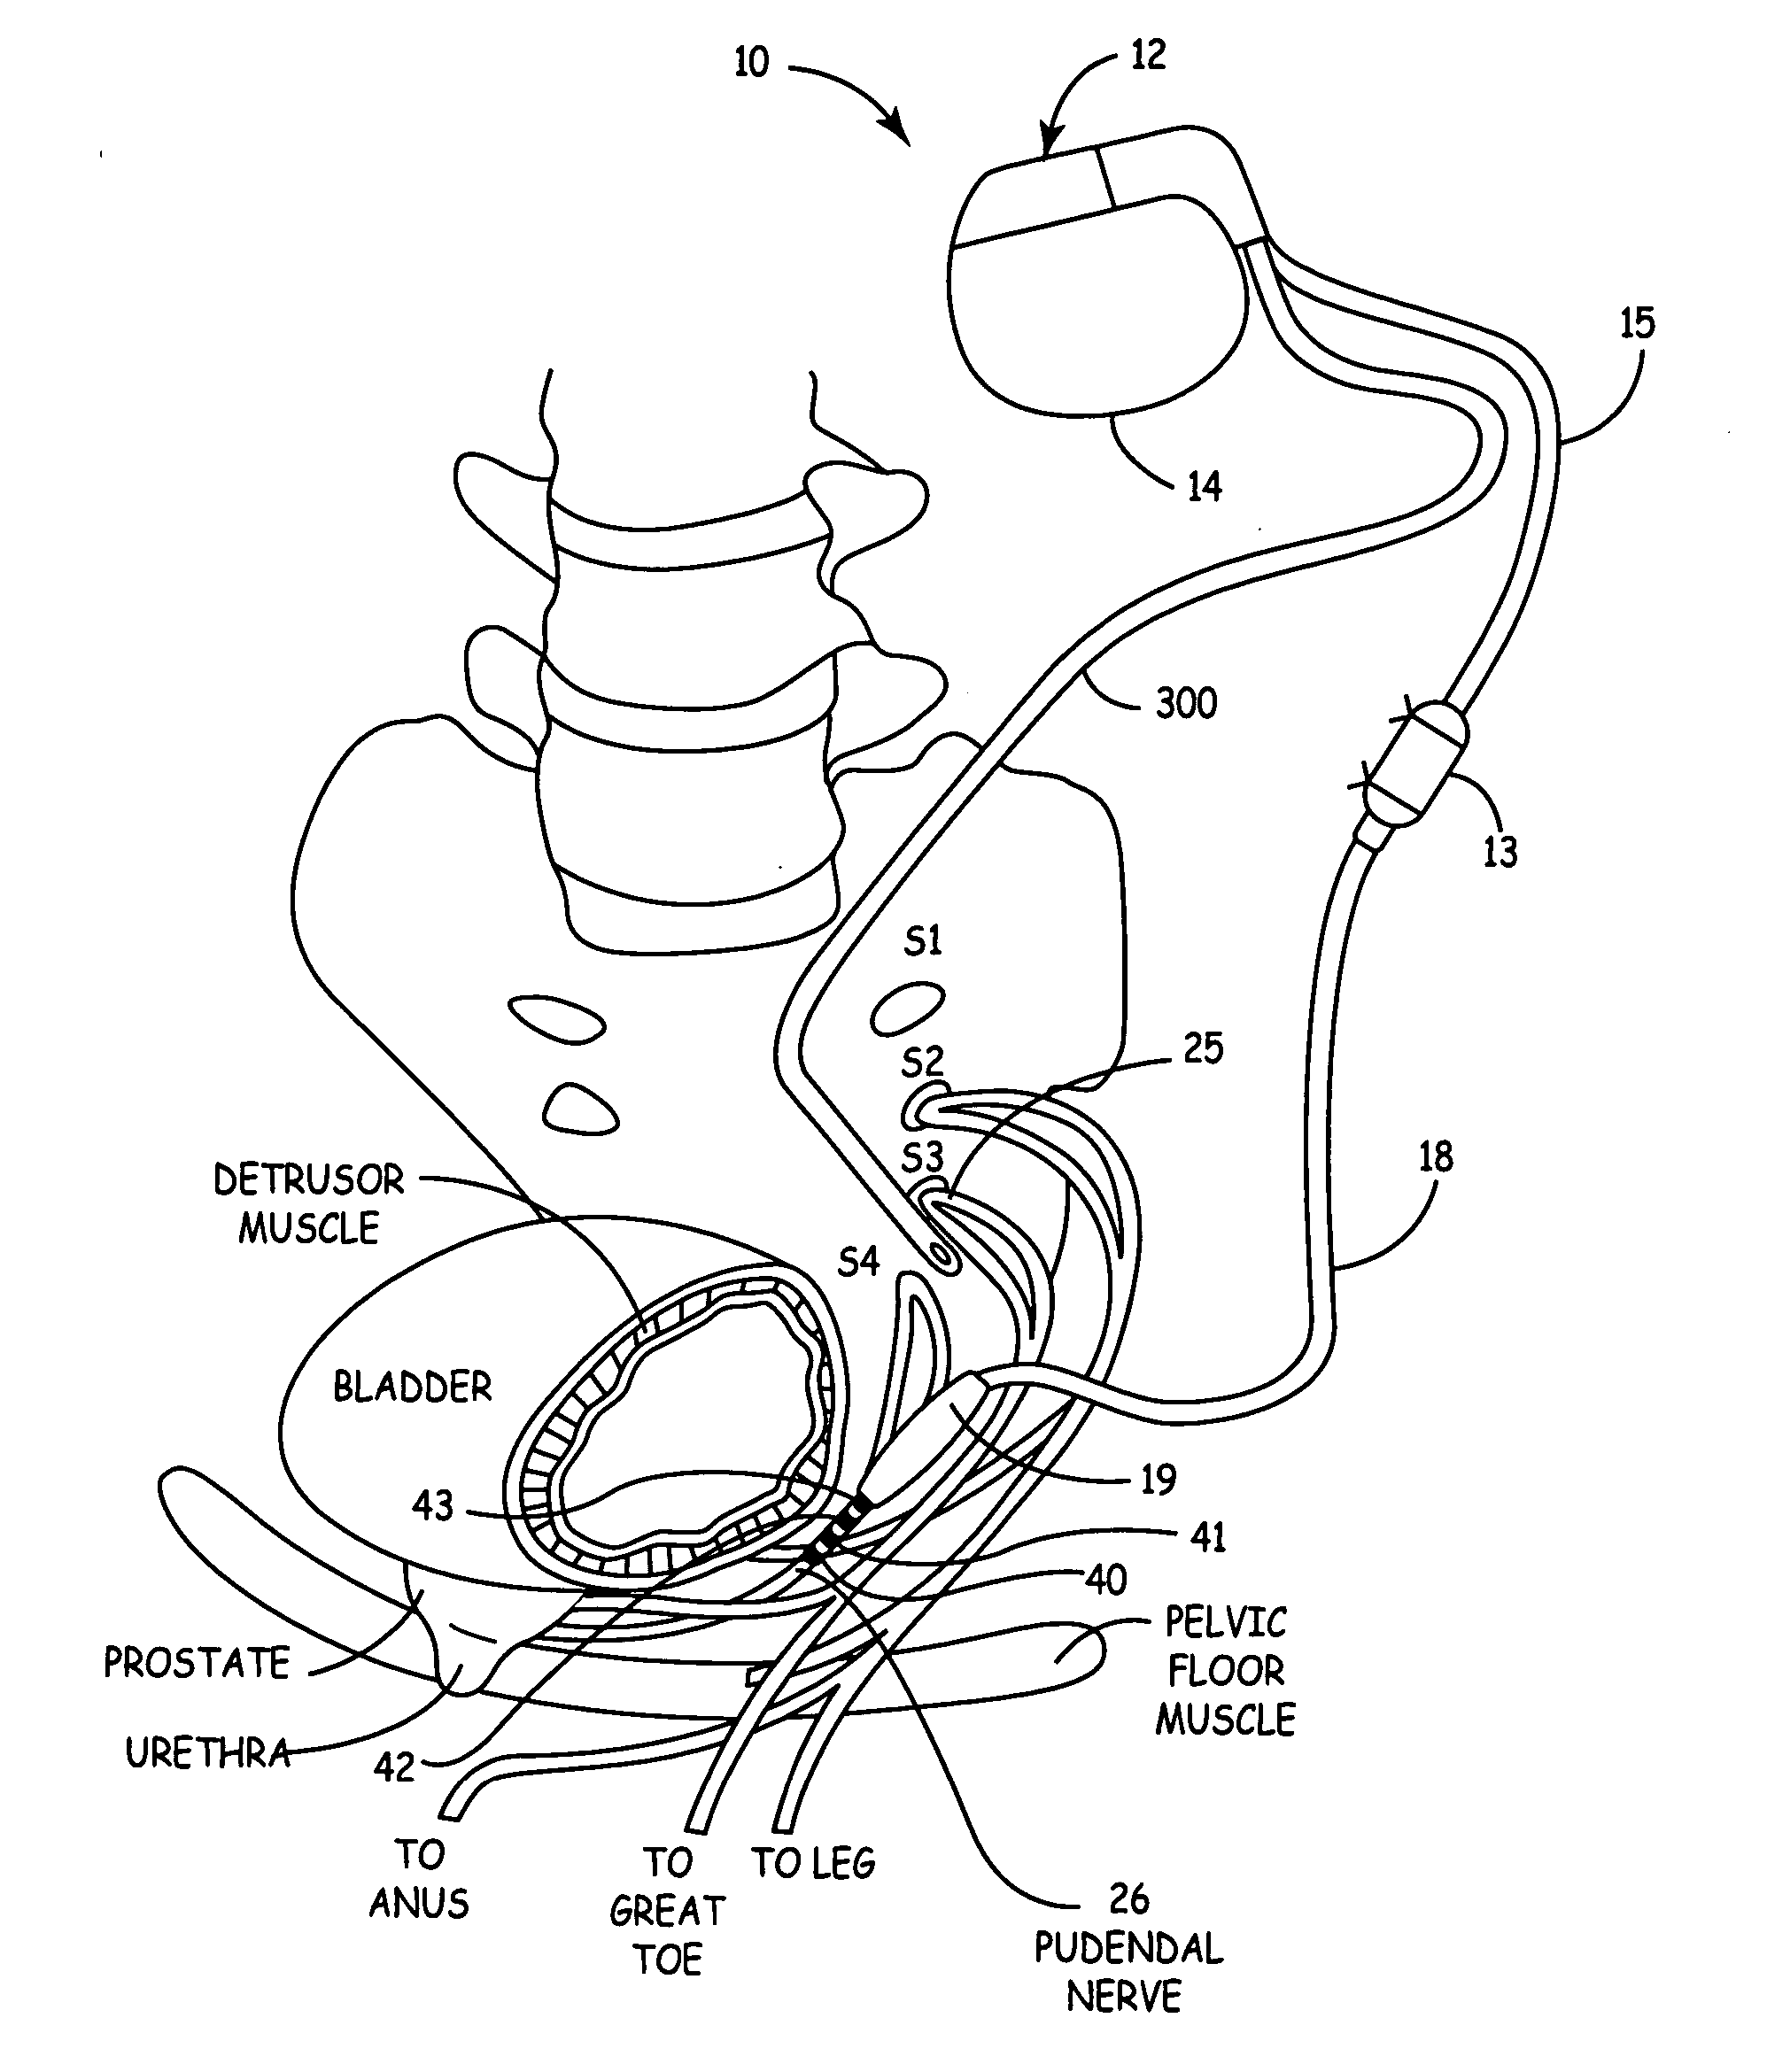 Method, system and device for treating disorders of the pelvic floor by delivering drugs to the pudendal nerves